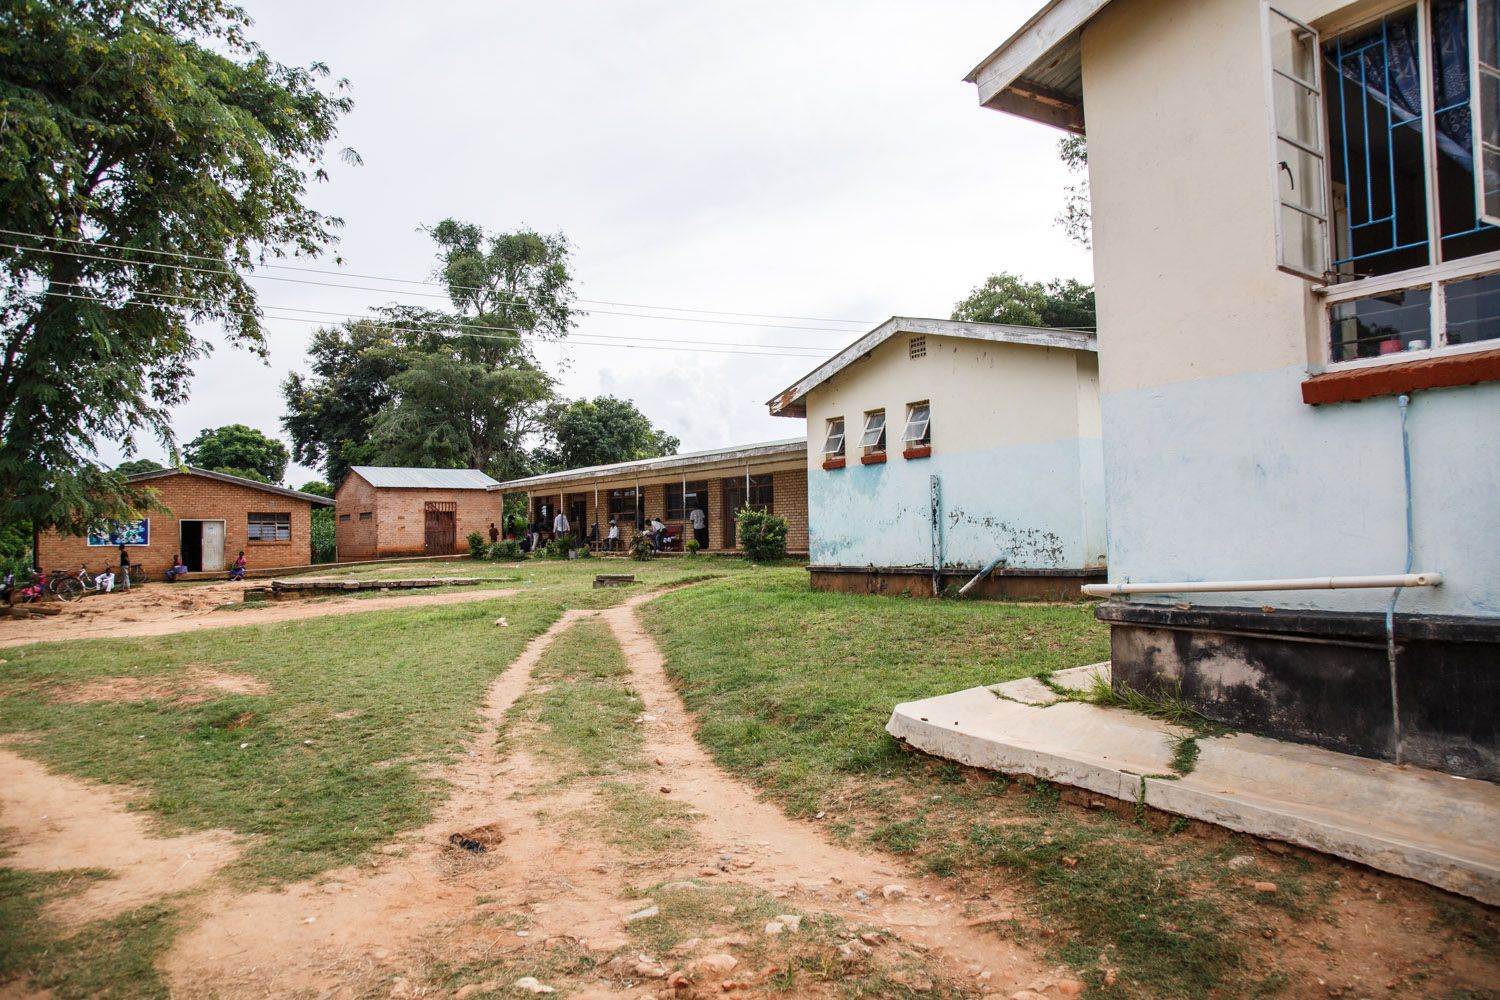 Chintheche Rural Hospital in Nkhata Bay district in north Malawi. Image by Nathalie Bertrams. Malawi, 2017.